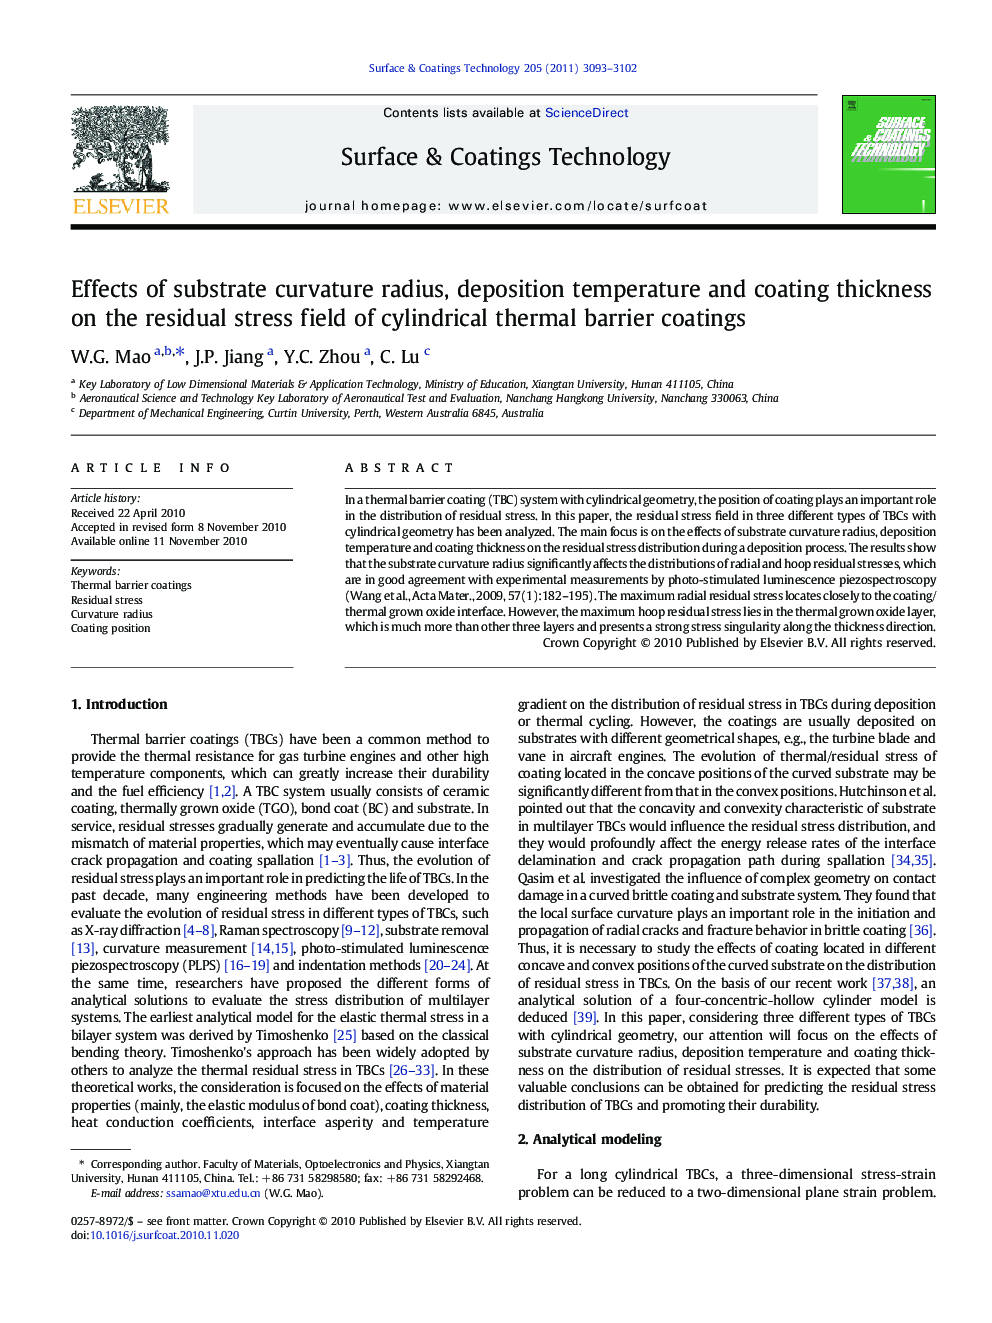 Effects of substrate curvature radius, deposition temperature and coating thickness on the residual stress field of cylindrical thermal barrier coatings